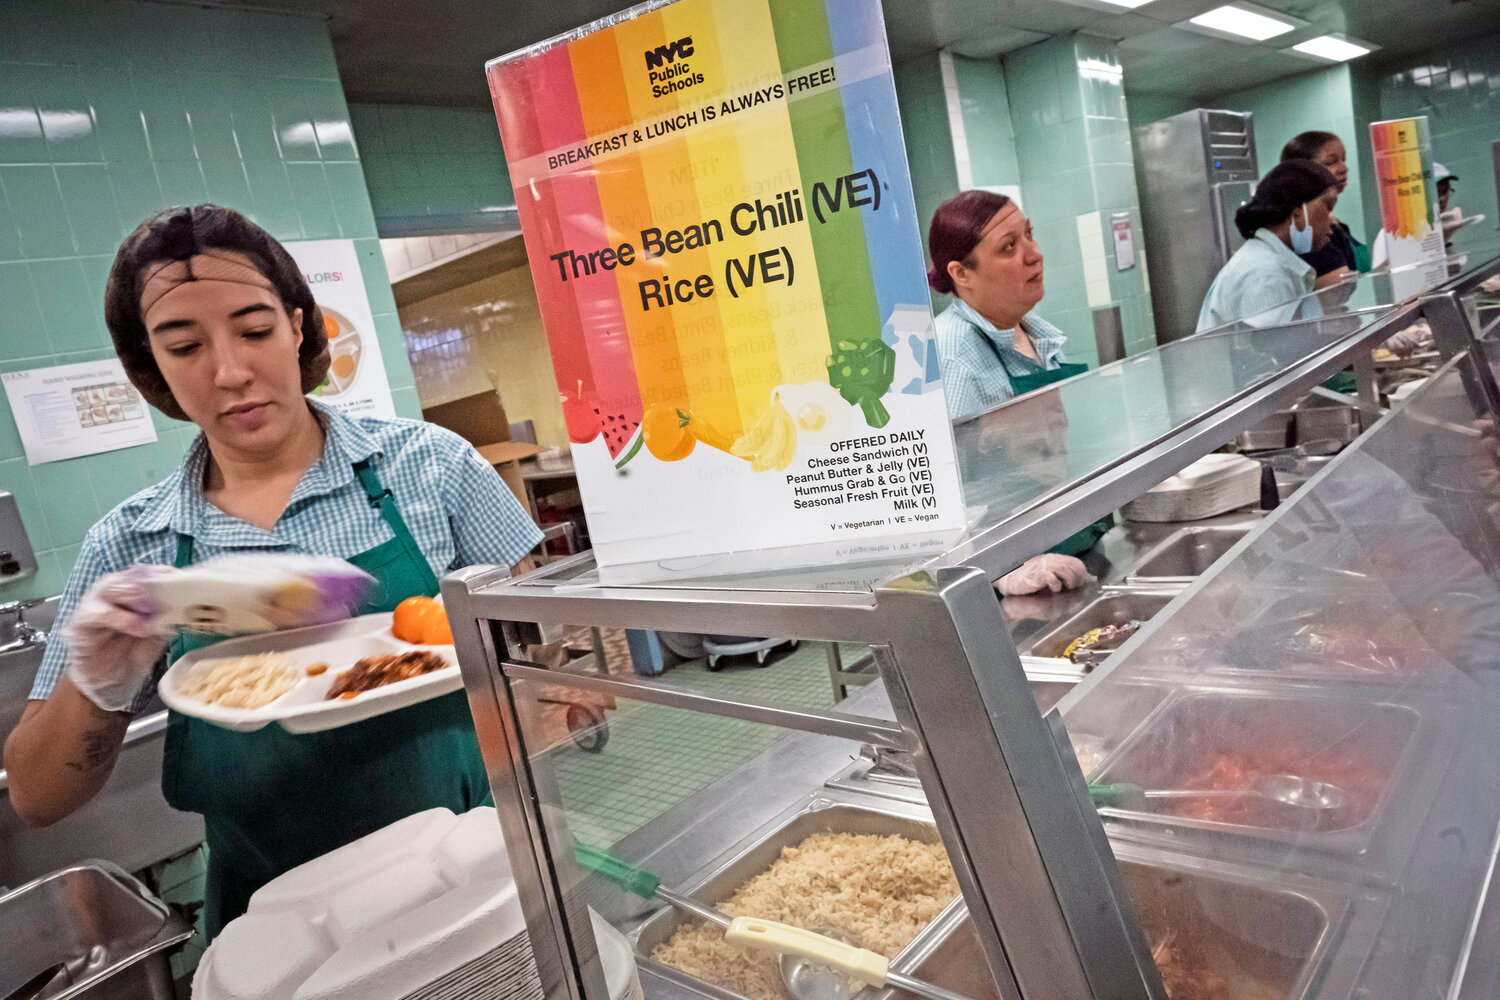 Cafeteria staff serve lunch to 7th graders during their lunch break at a public school, Saturday, Feb. 11, 2023, in the Brooklyn borough of New York.